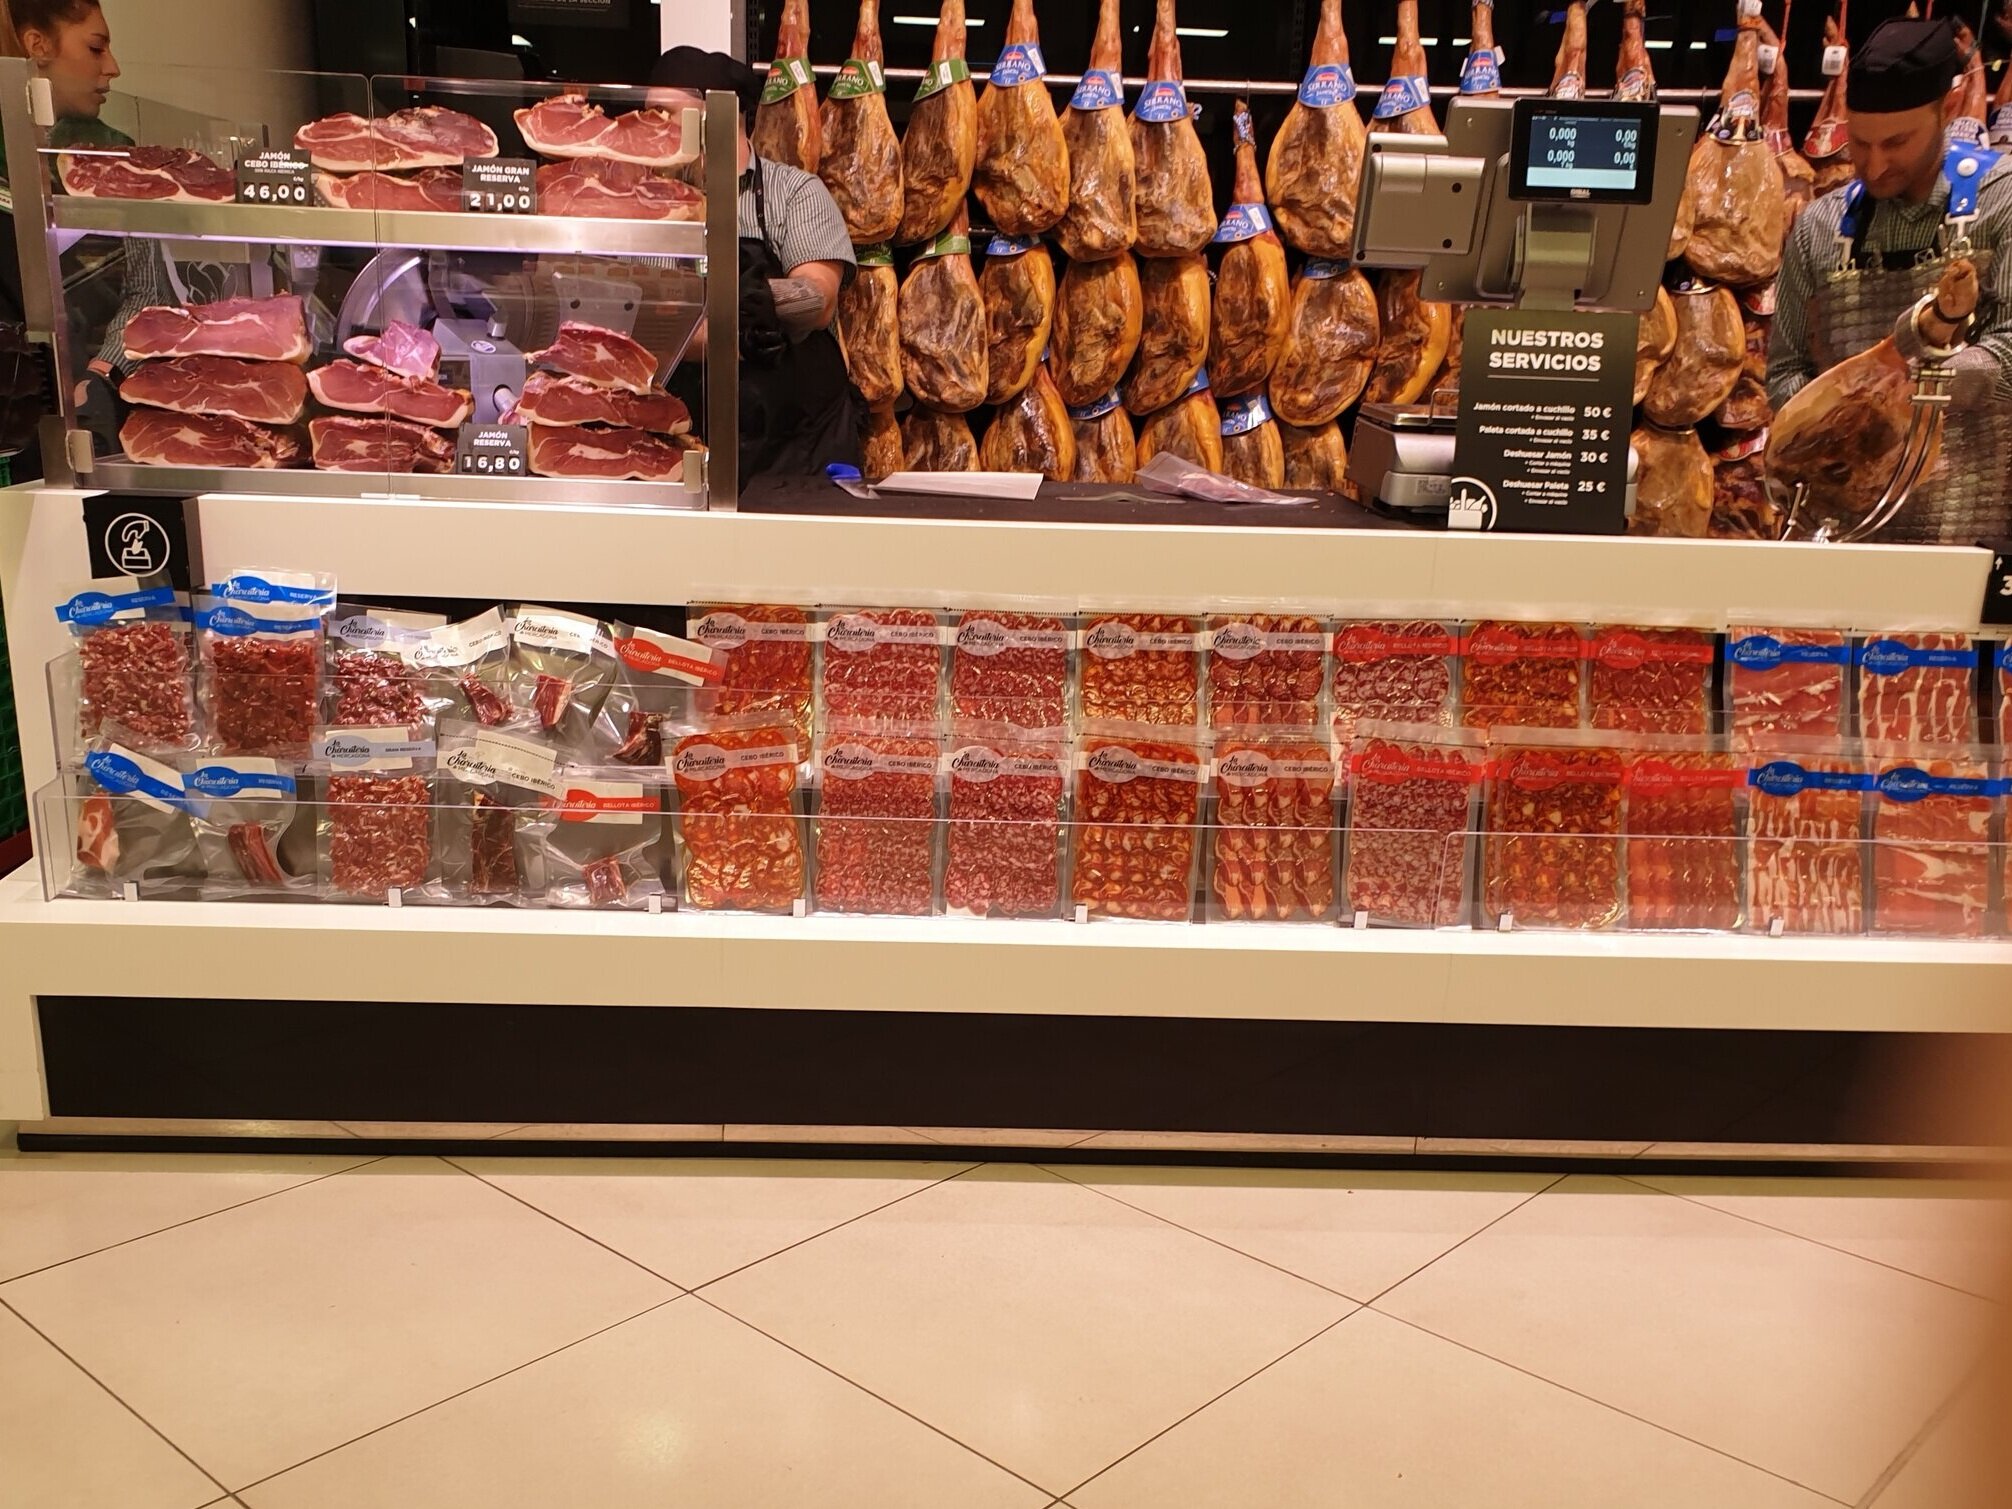 The meat section of the Mercadona.